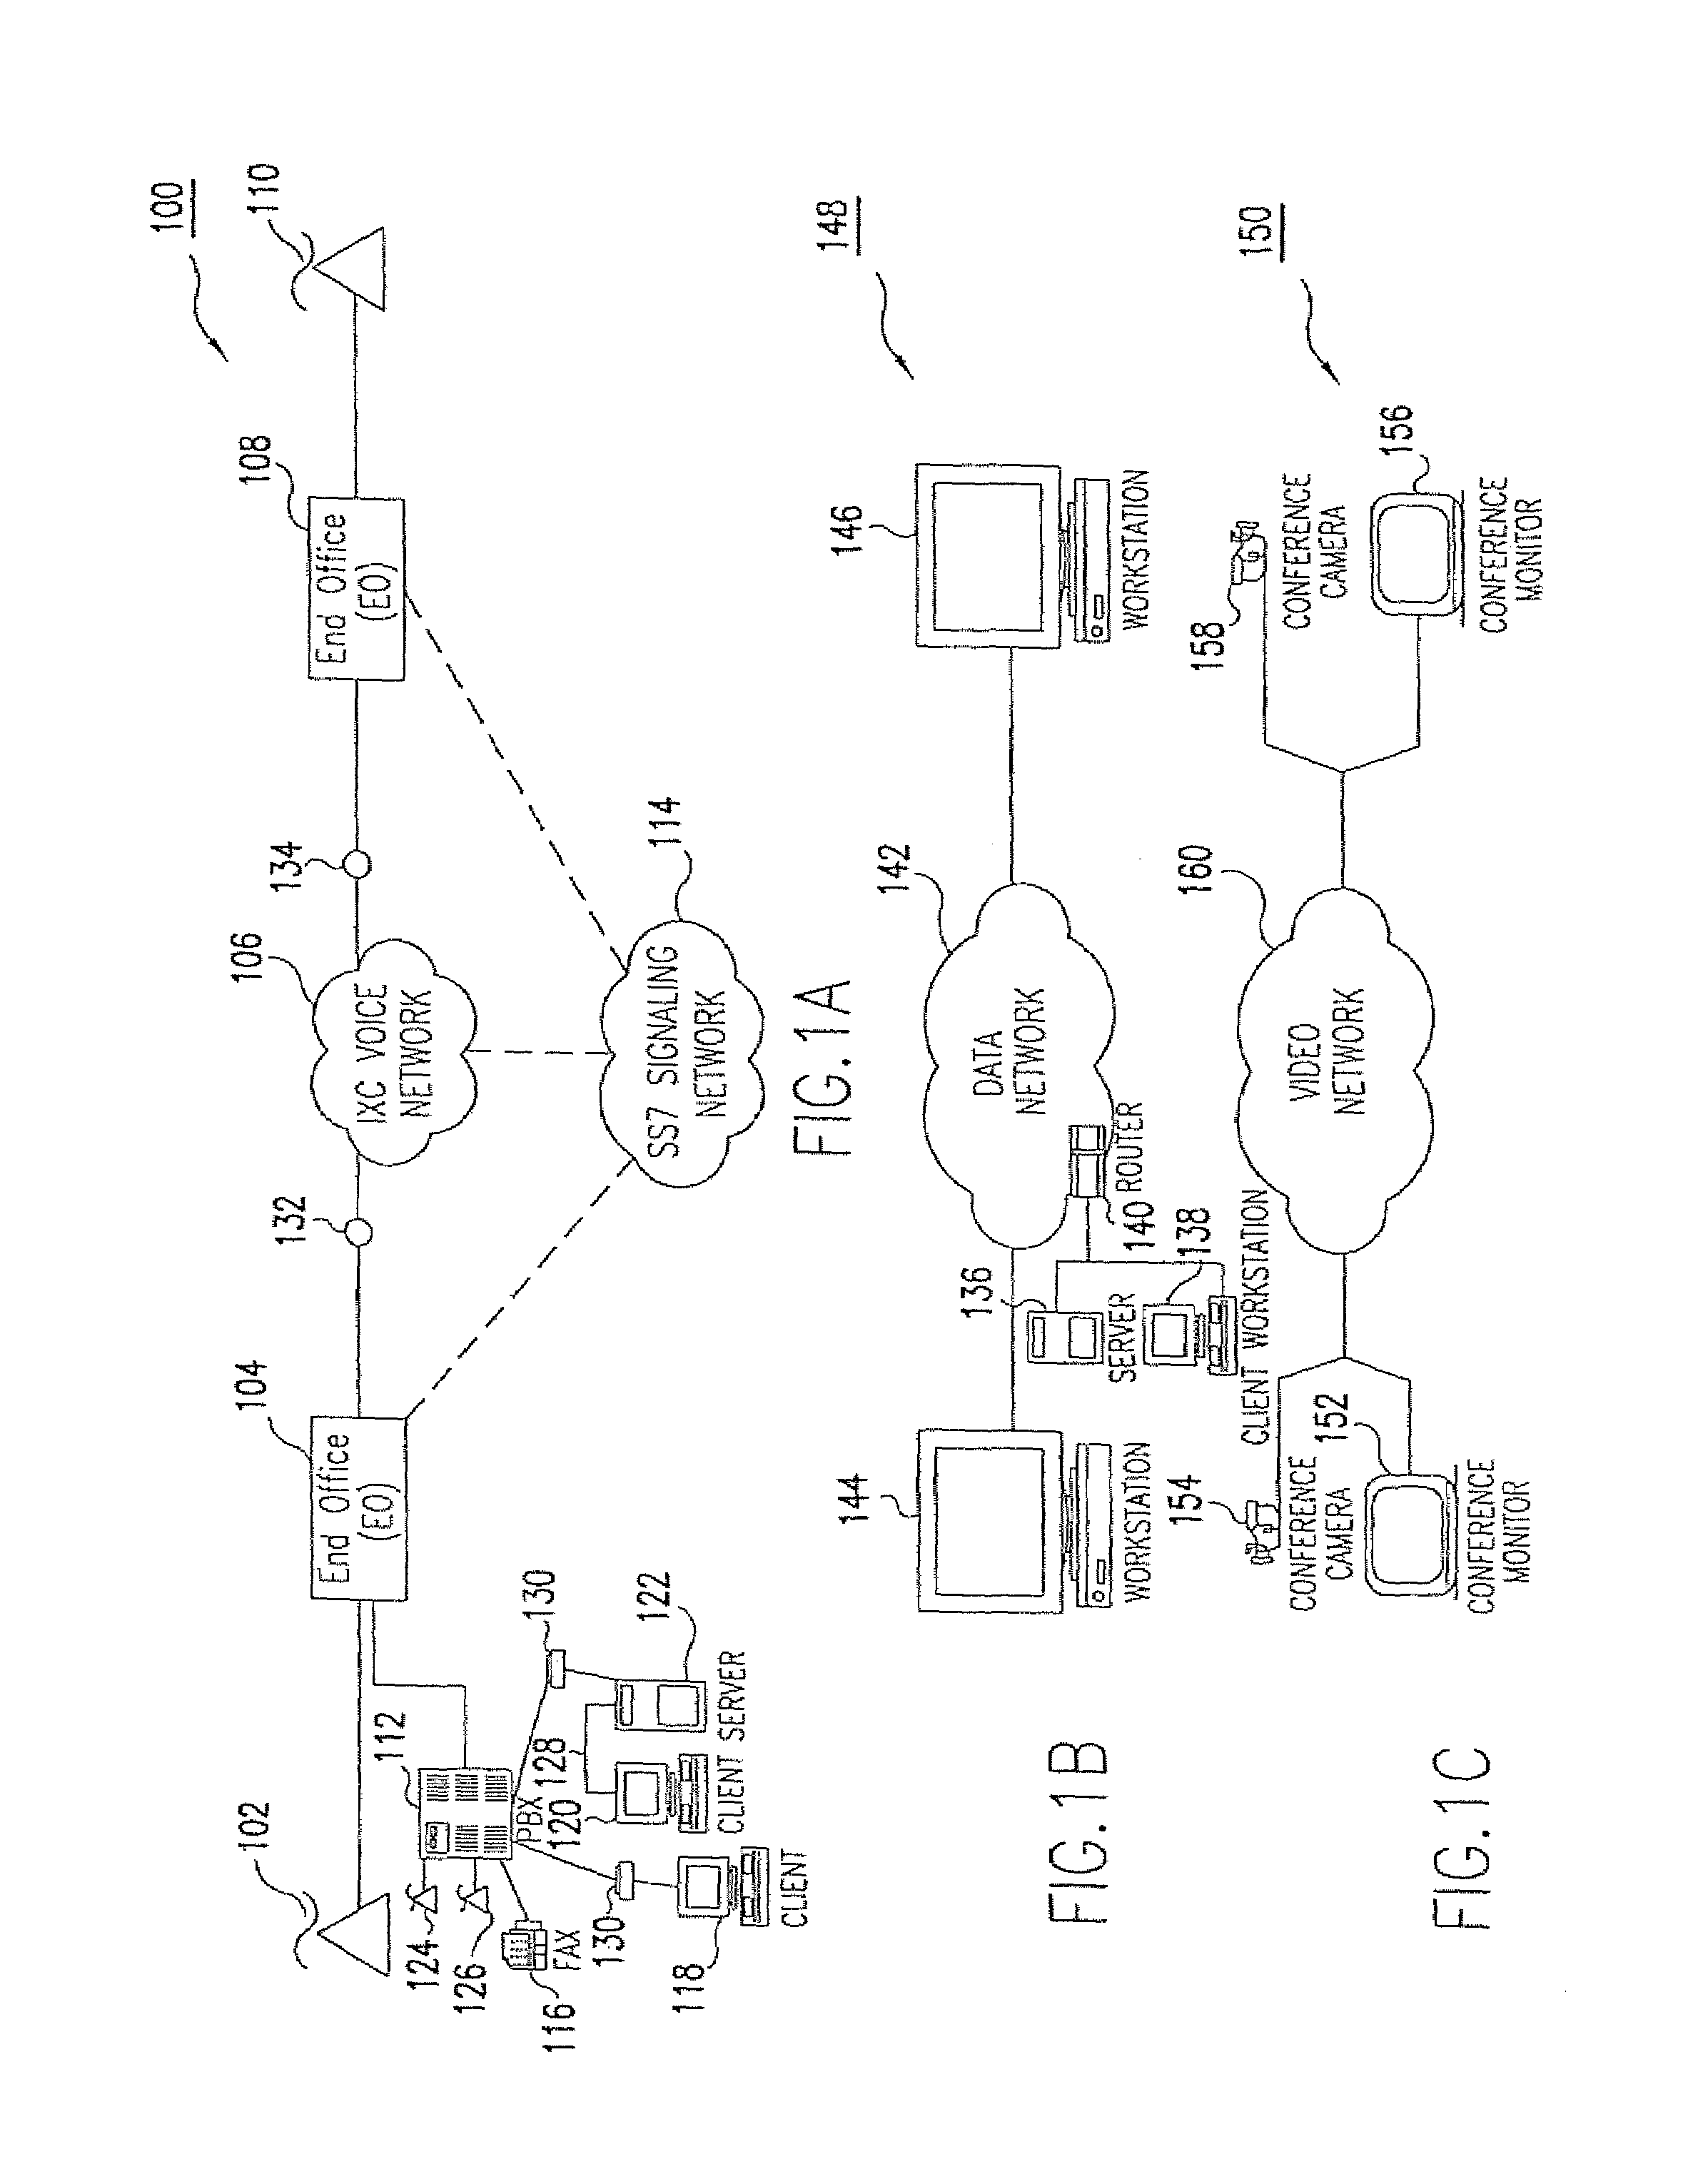 Method and computer program product for internet protocol (IP)-flow classification in a wireless point to multi-point (PtMP) transmission system